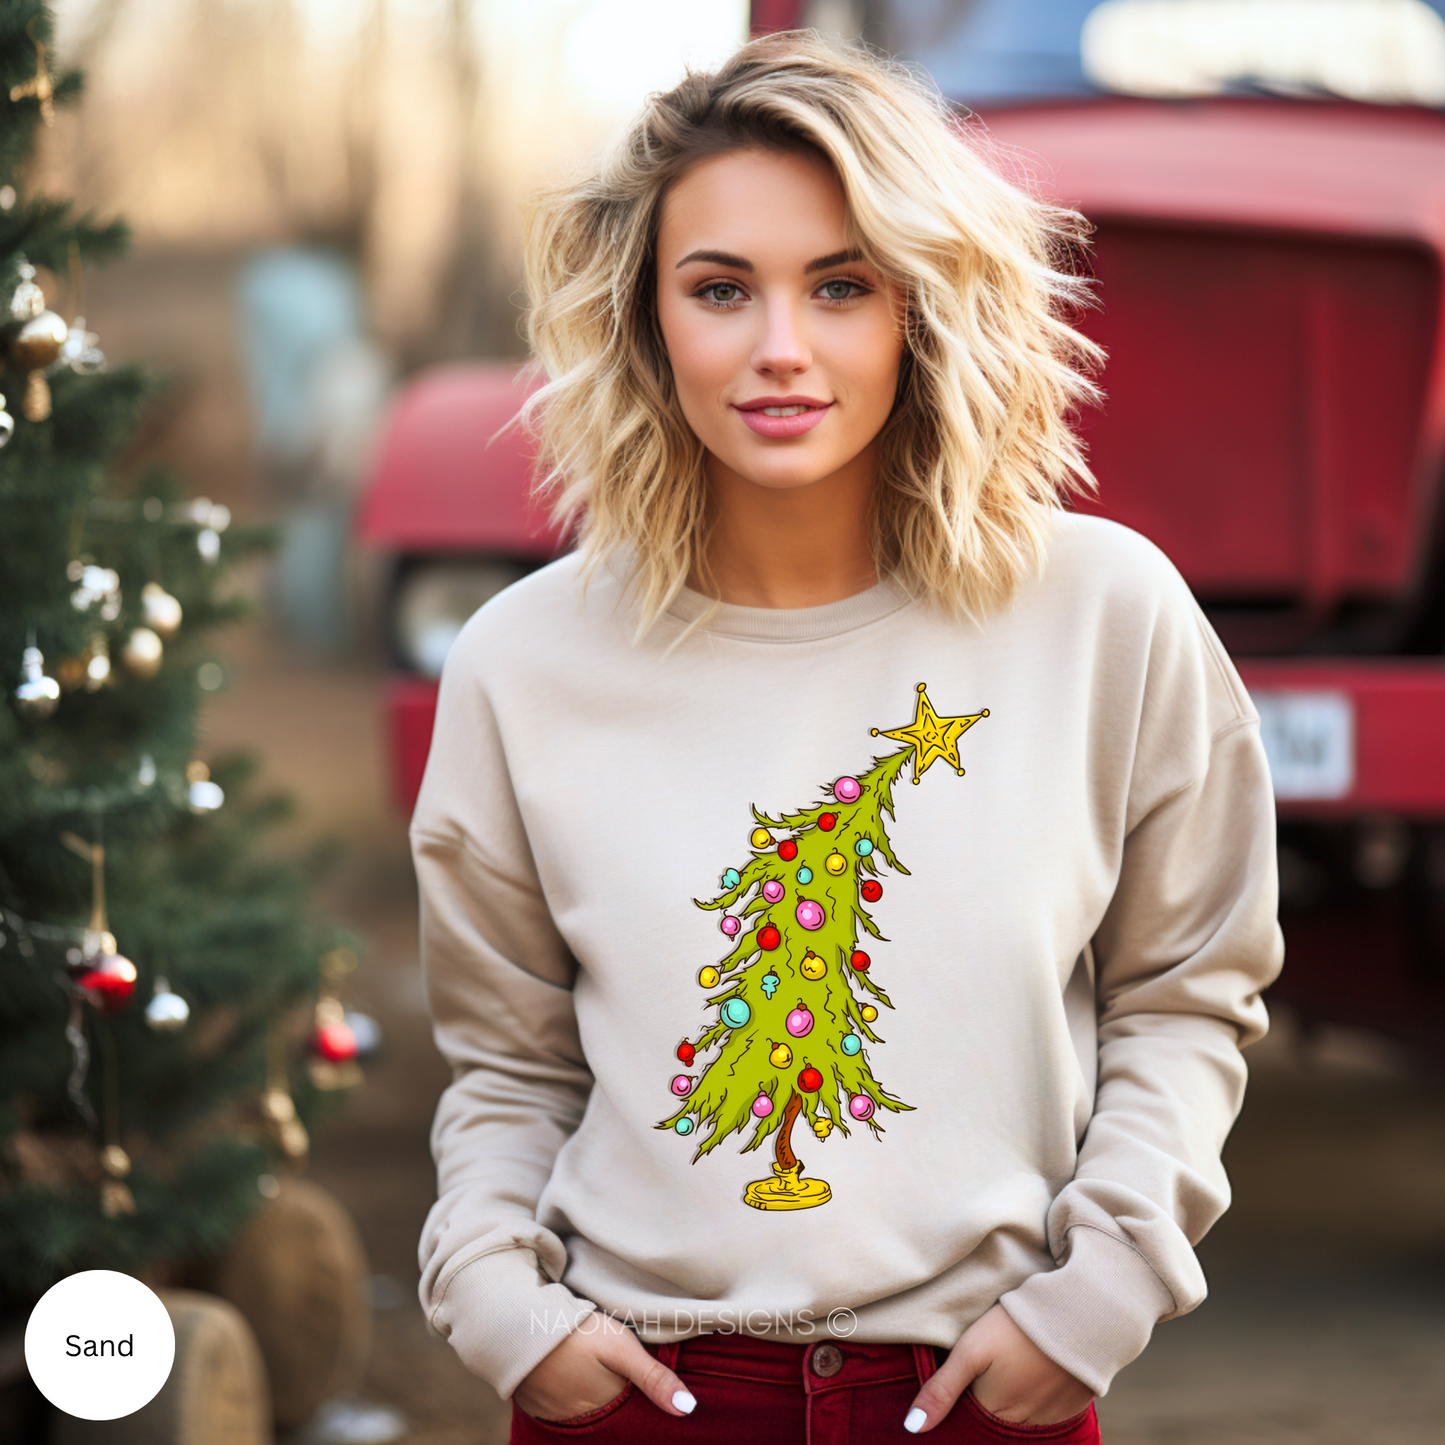 grnch tree sweatshirt, merry christmas sweater, movie christmas characters, trendy christmas lights, merry and bright sweater